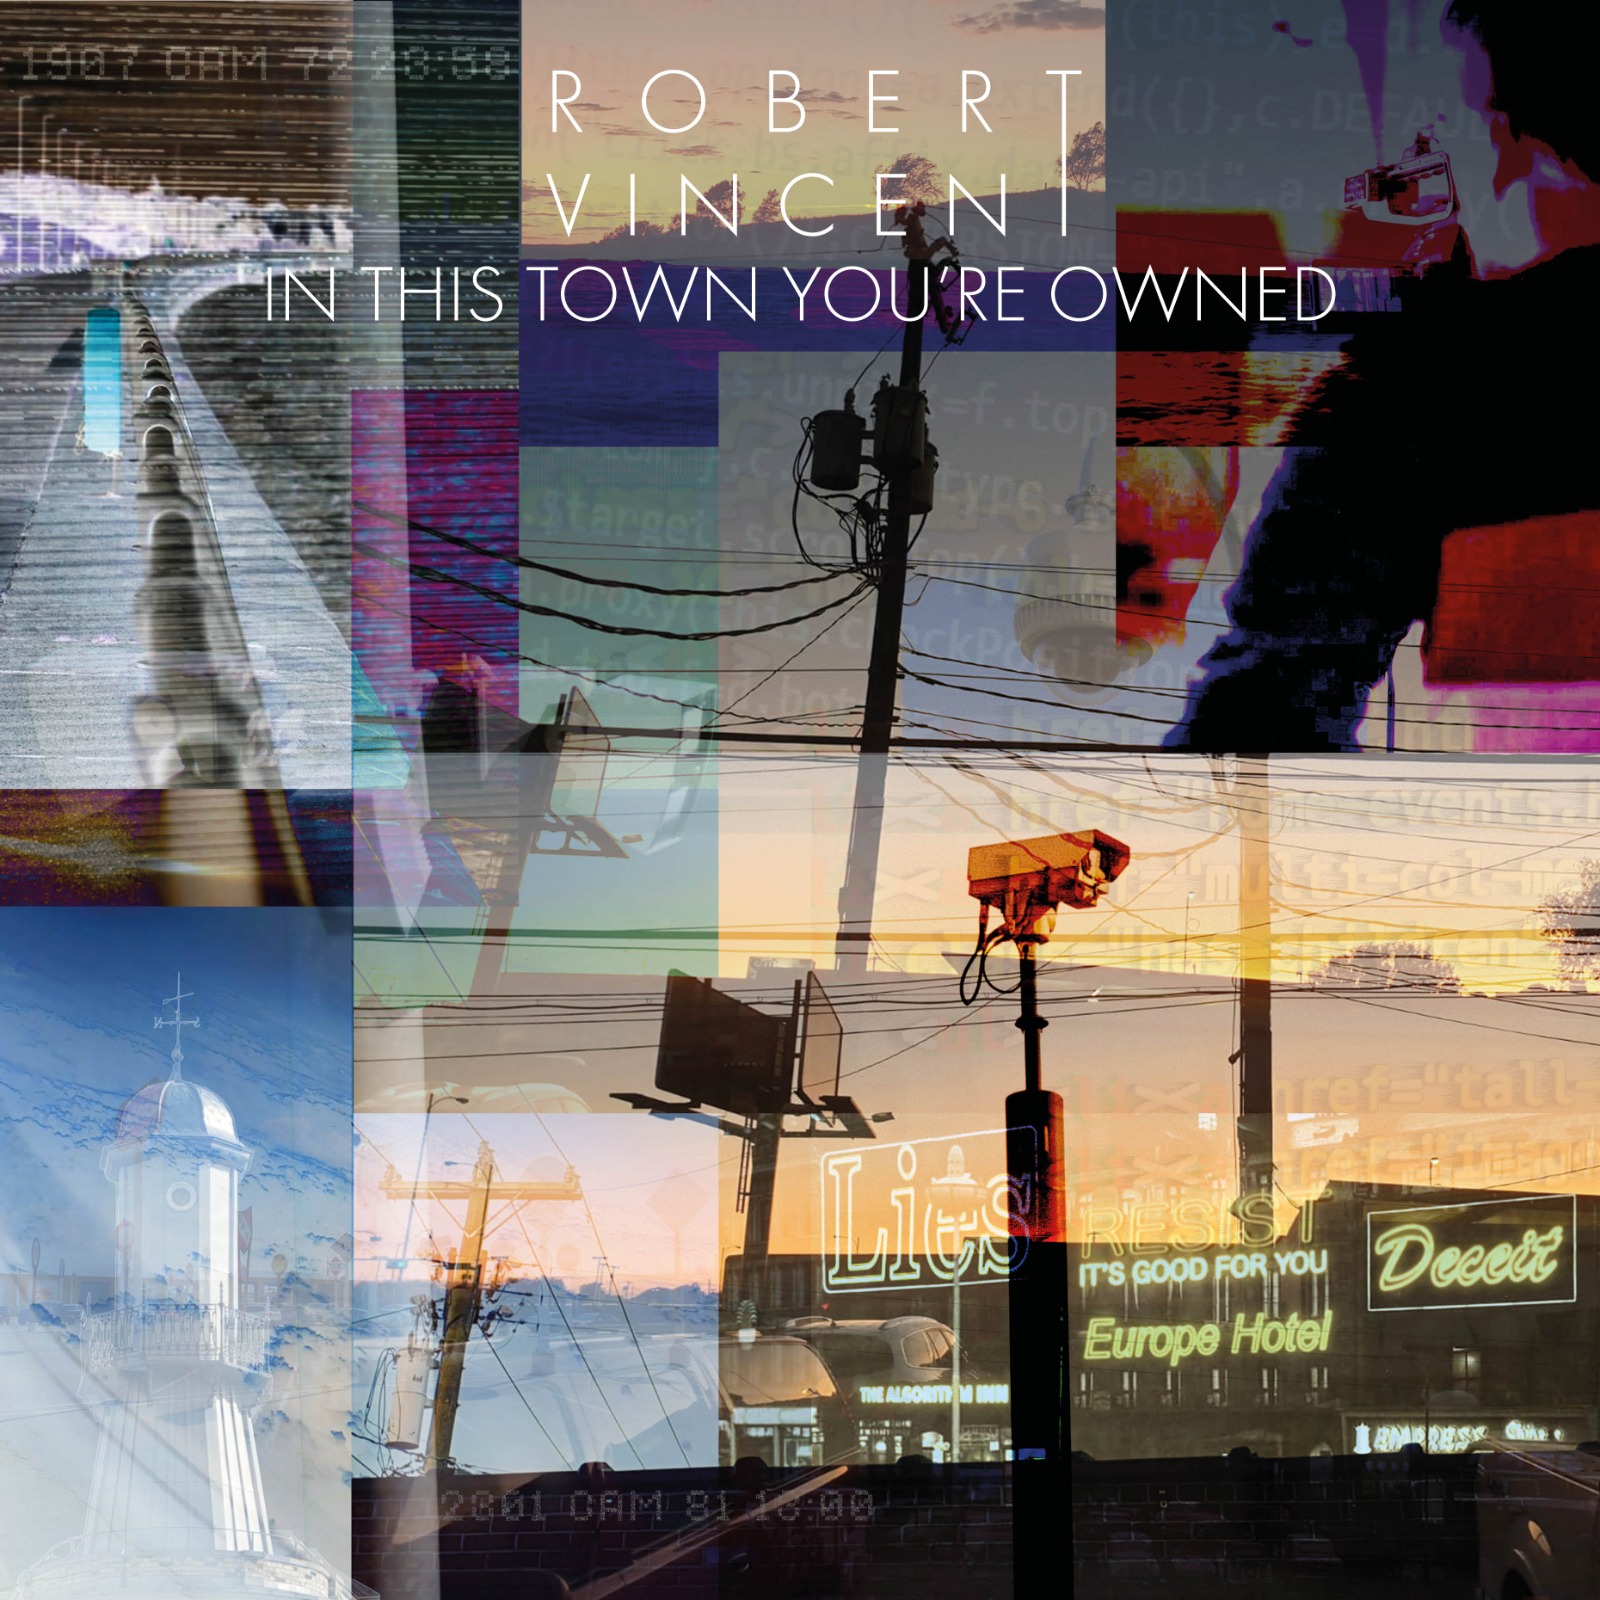 Robert Vincent Remarks On Division And Life In This Town